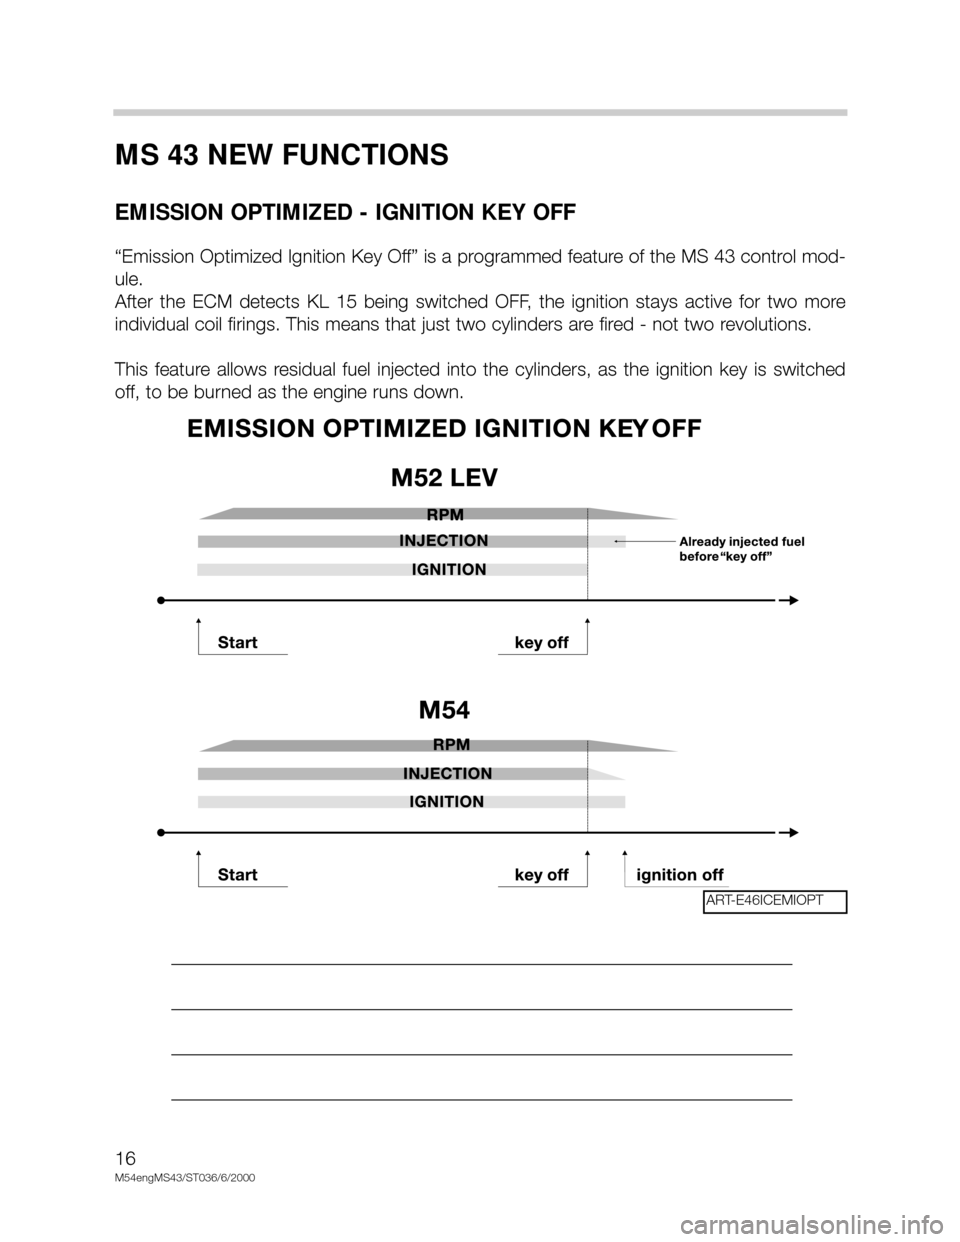 BMW X5 2001 E53 M54 Engine User Guide 16
M54engMS43/ST036/6/2000
MS 43 NEW FUNCTIONS
EMISSION OPTIMIZED - IGNITION KEY OFF
“Emission Optimized Ignition Key Off” is a programmed feature of the MS 43 control mod-
ule. 
After  the  ECM  